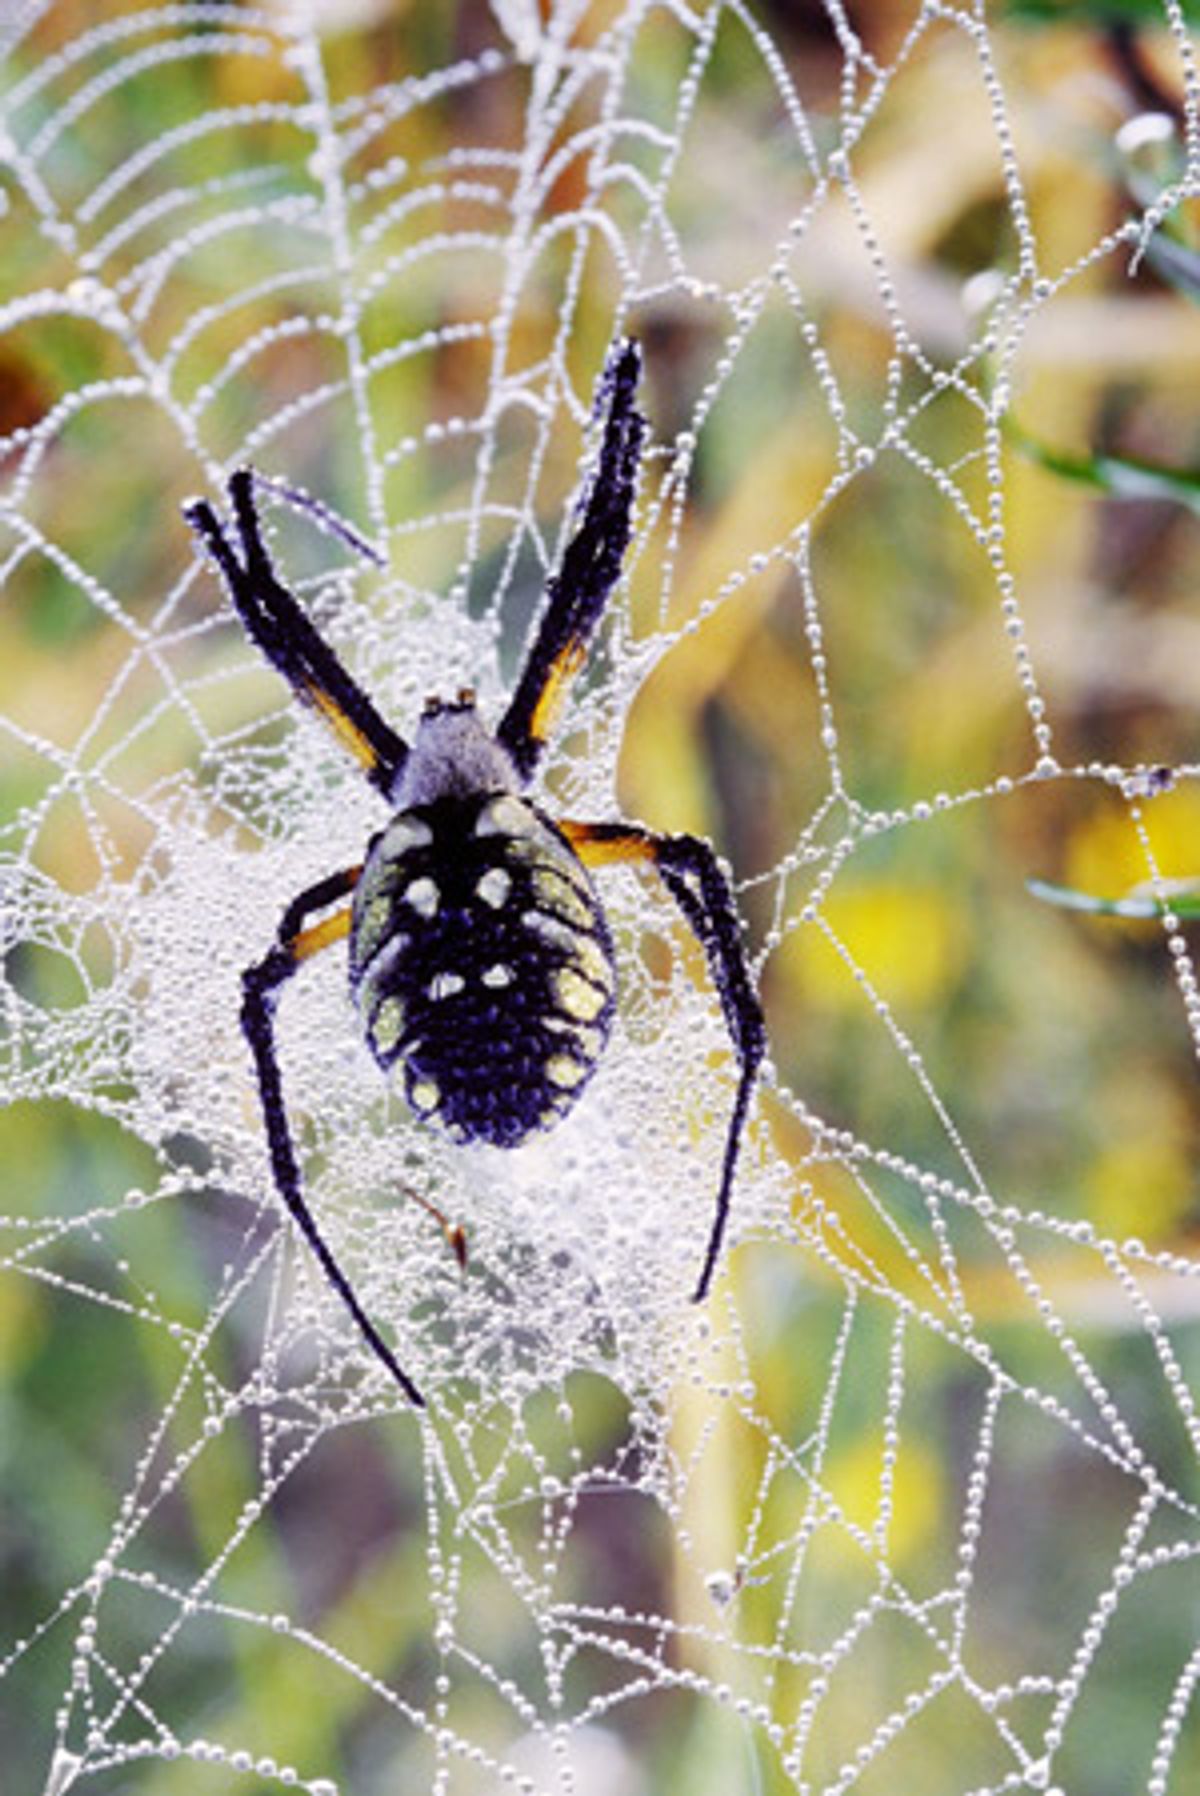 Spider Silk Weaves New Path for Electronics